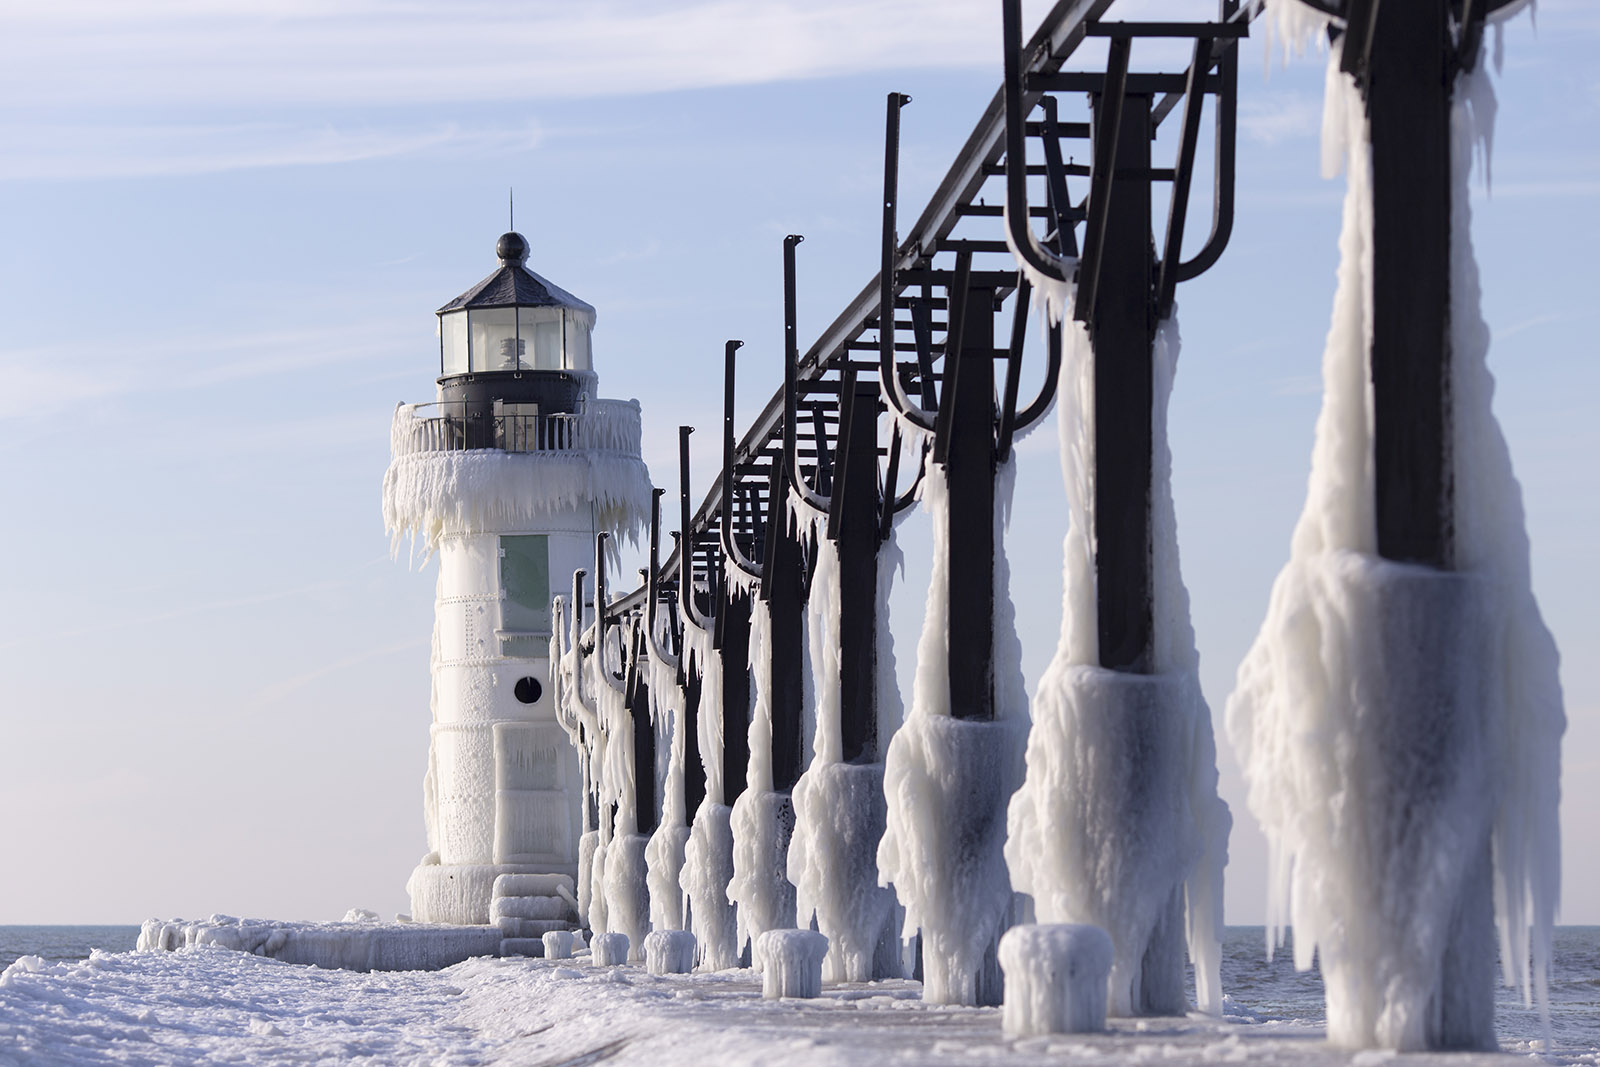 The St. Joseph lighthouse frozen during the day